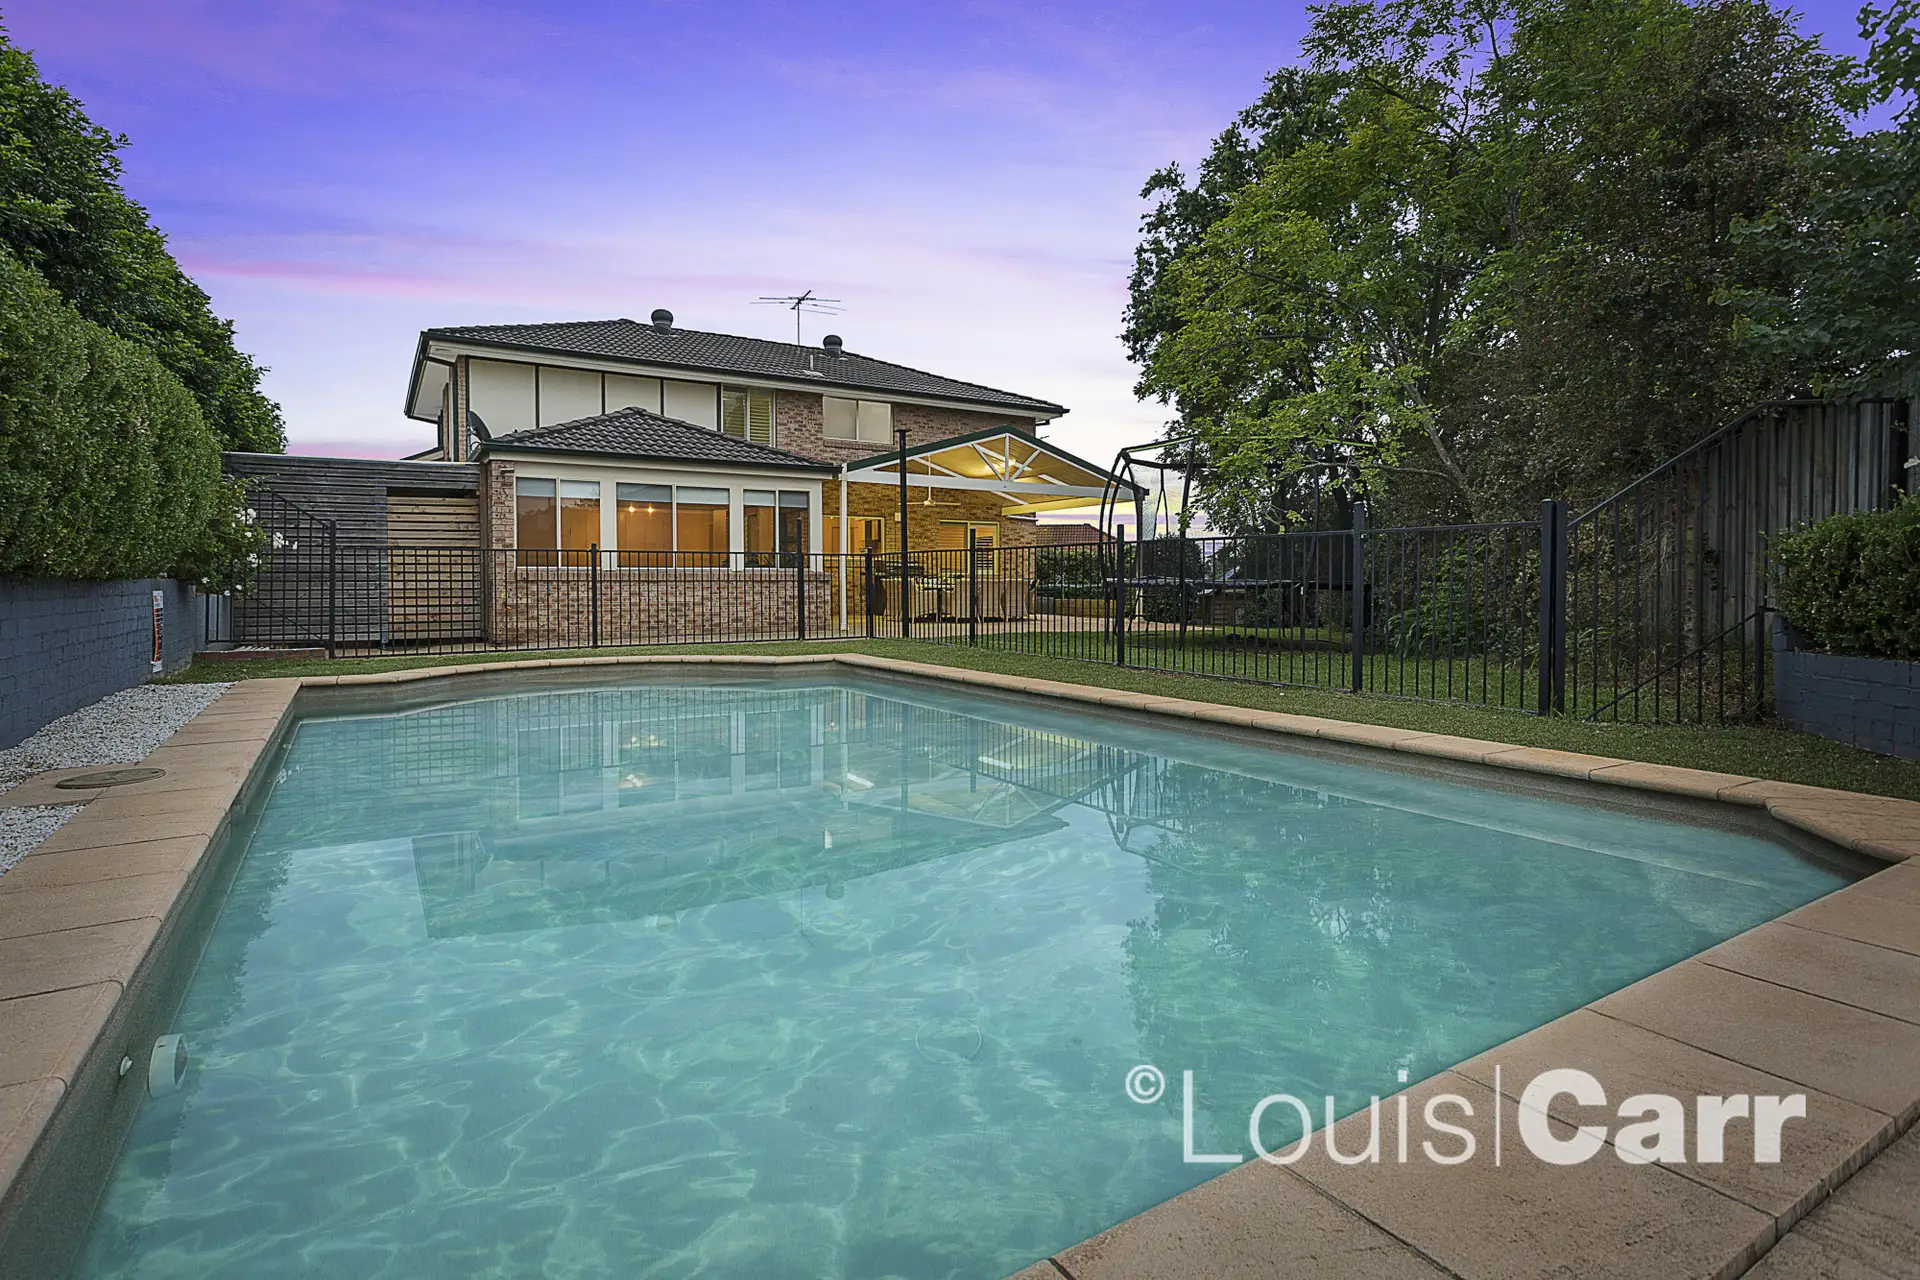 Photo #3: 31 Carnival Way, Beaumont Hills - Sold by Louis Carr Real Estate